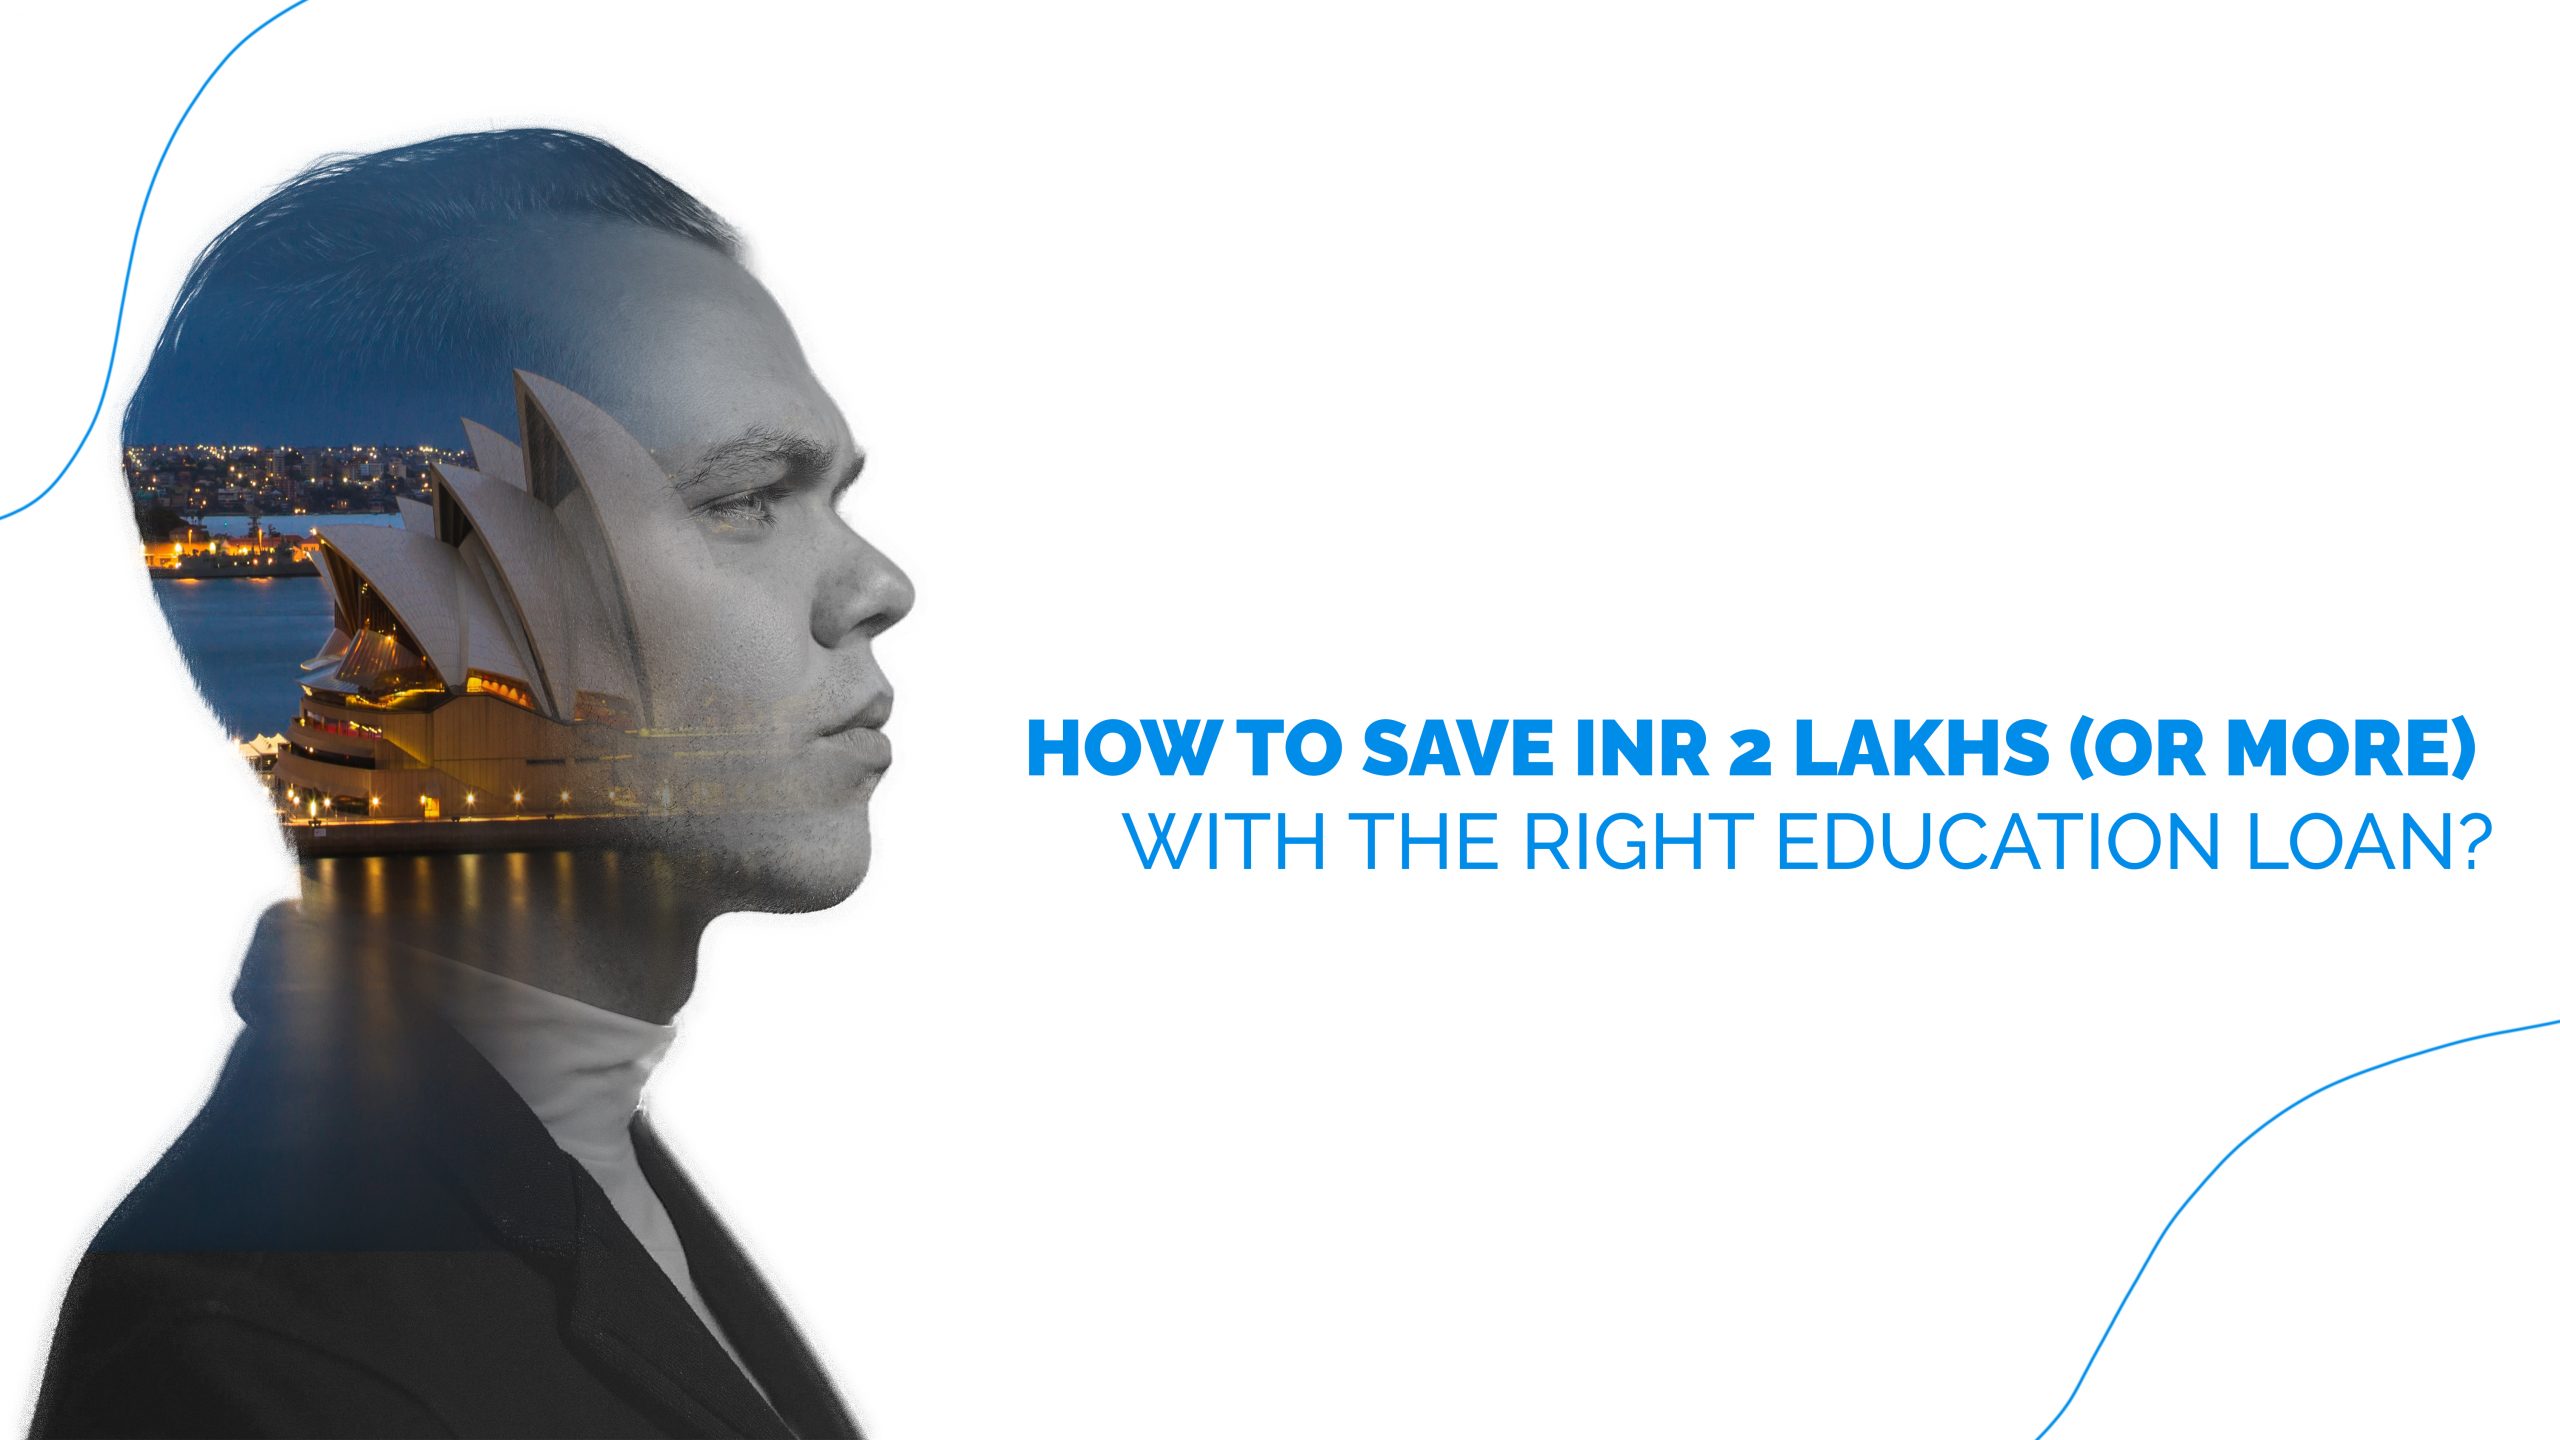 How to Save Money With the Right Education Loan?